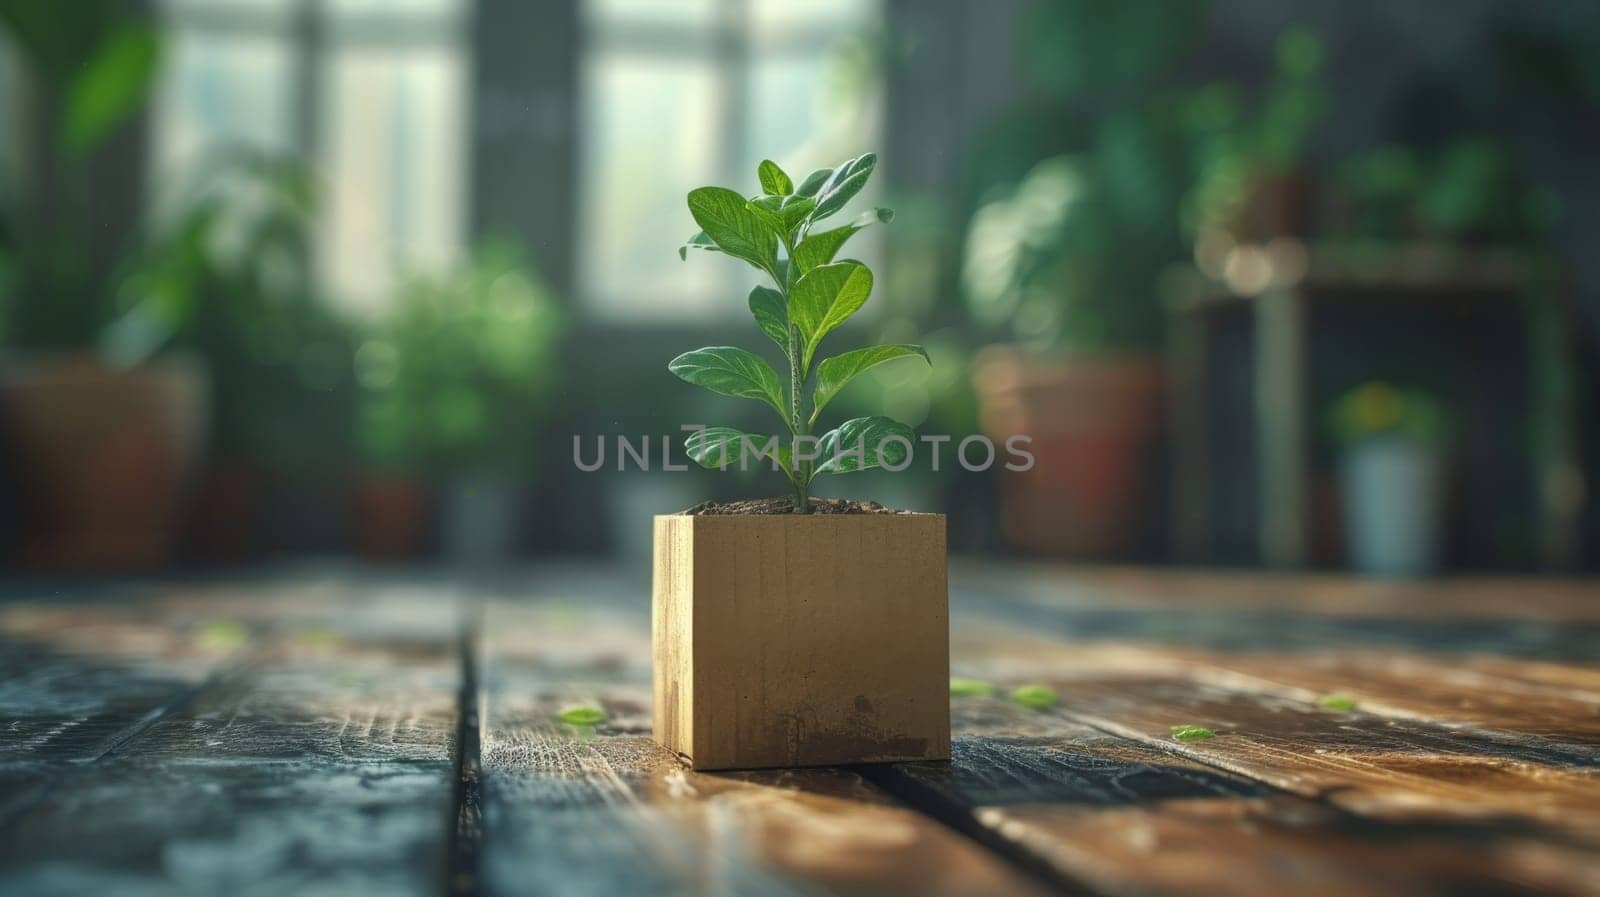 A young green plant in an eco-pot on the floor, a germinating seed in a craft paper pot.